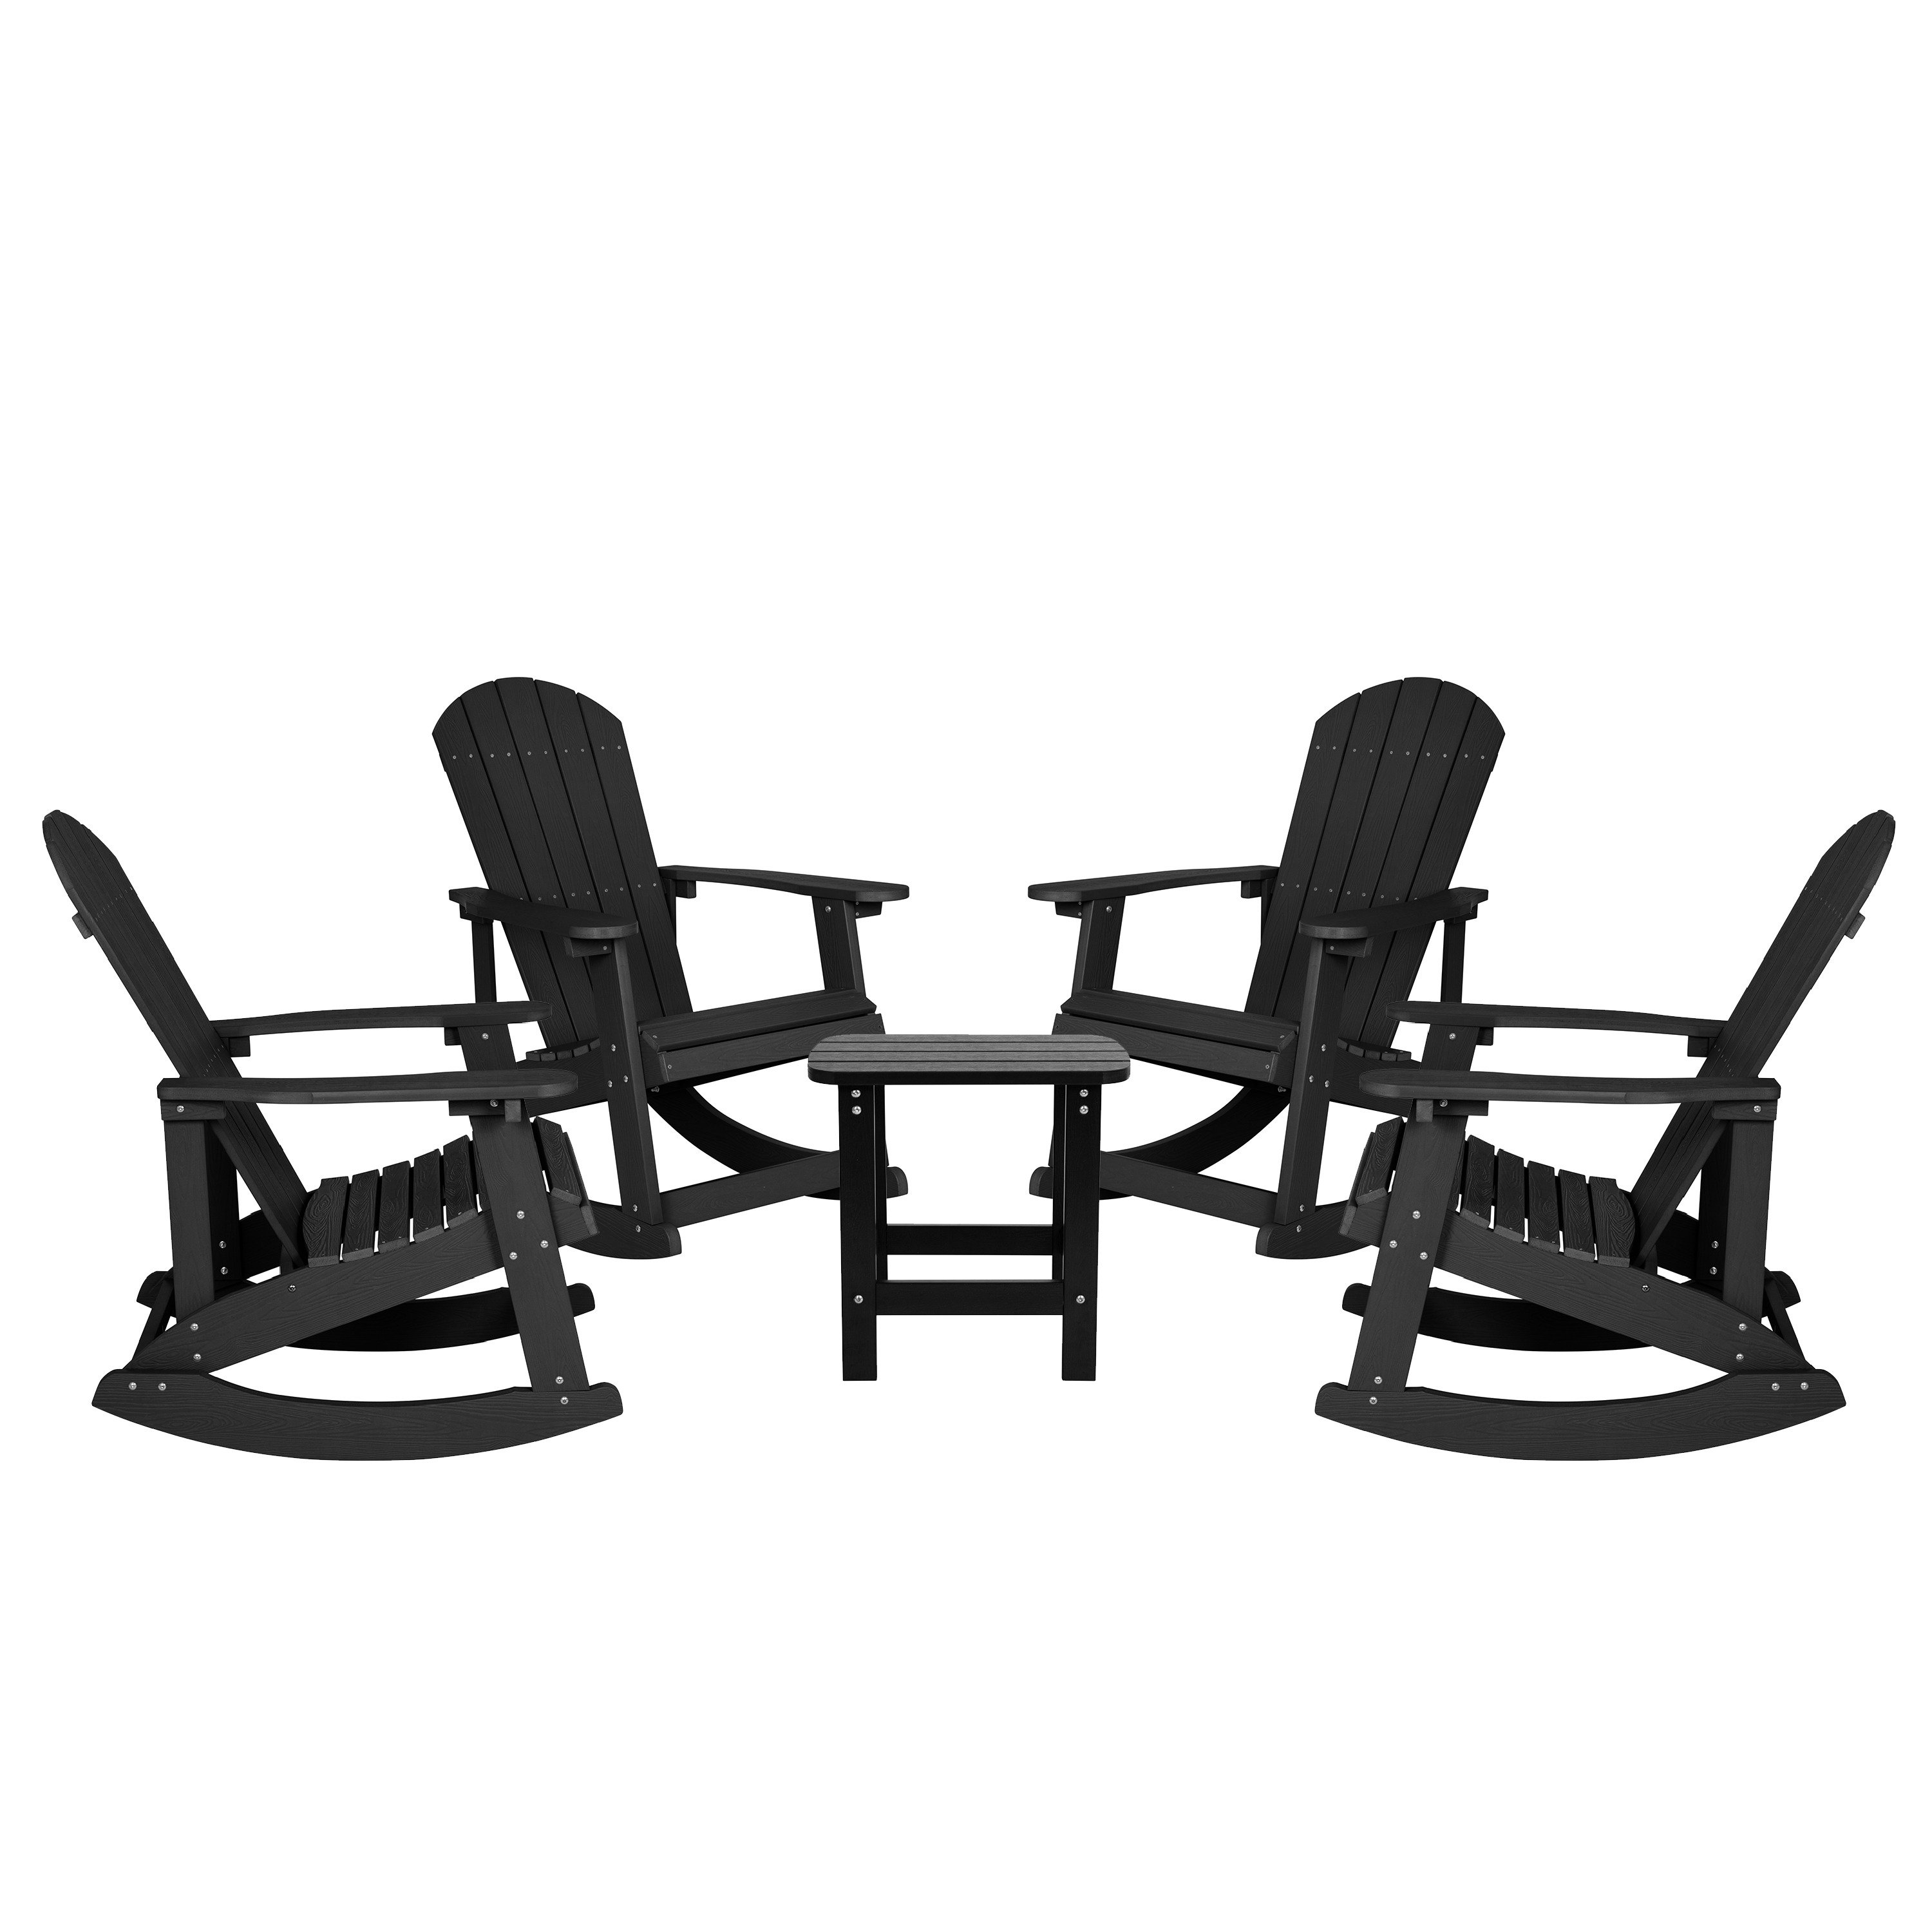 Psilvam Patio Rocking Chair, Poly Lumber Porch Rocker with High Back,  350Lbs Support Rocking Chairs for Both Outdoor and Indoor, Poly Rocker  Chair